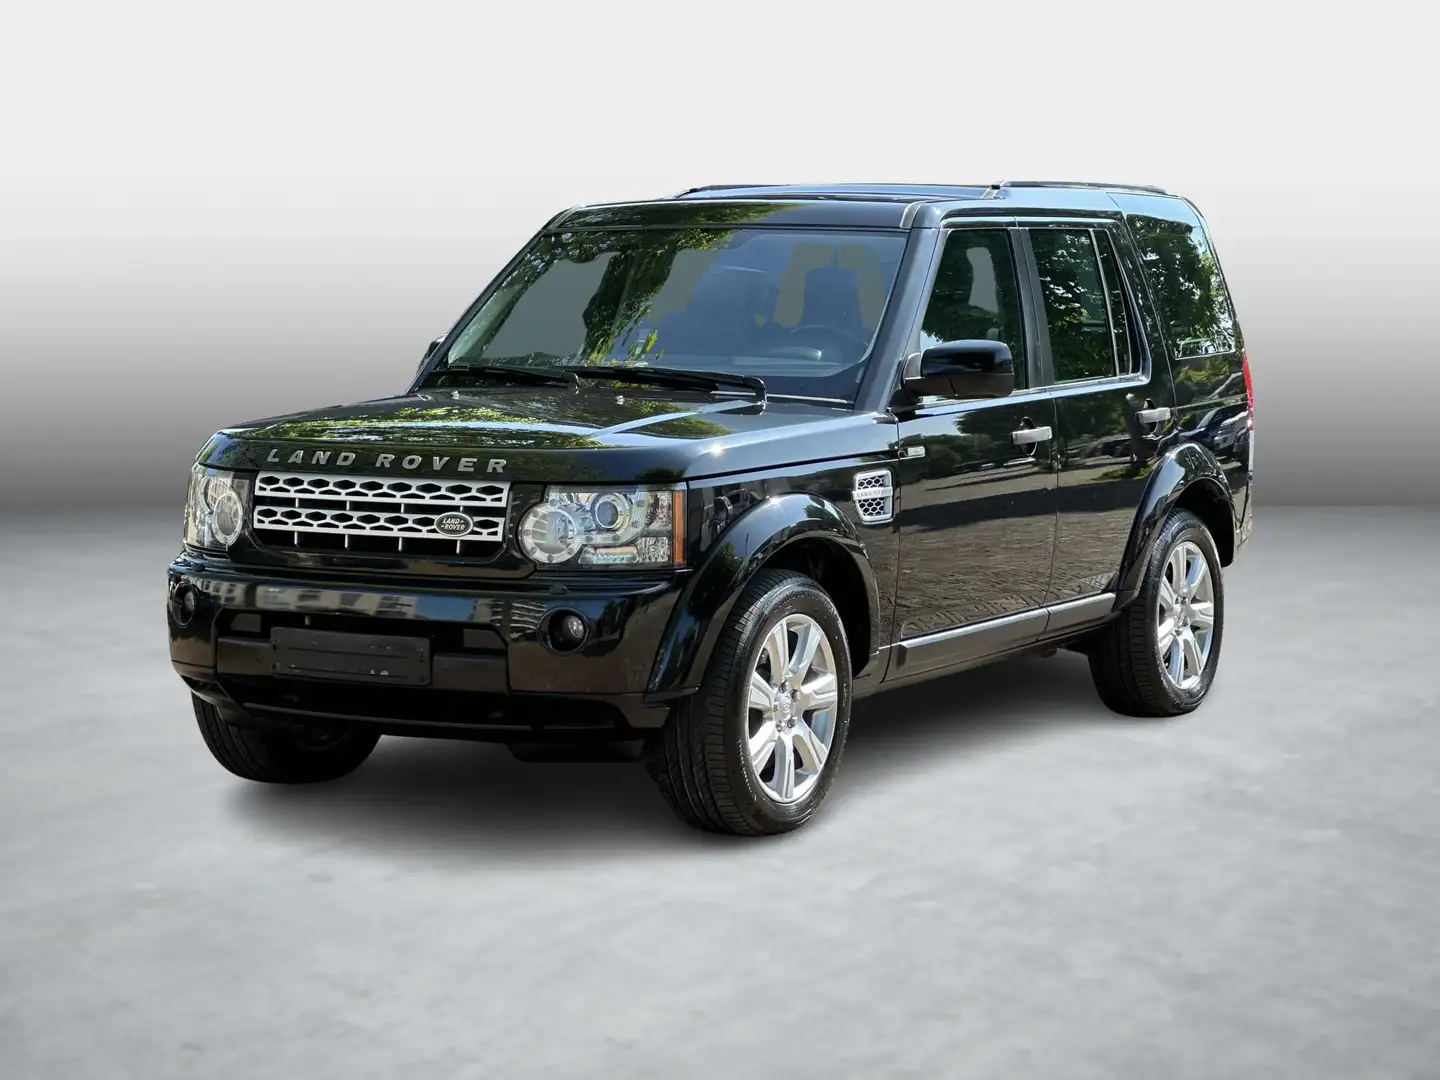 Land Rover Discovery 5.0 V8 HSE 5.0 Hse - 1